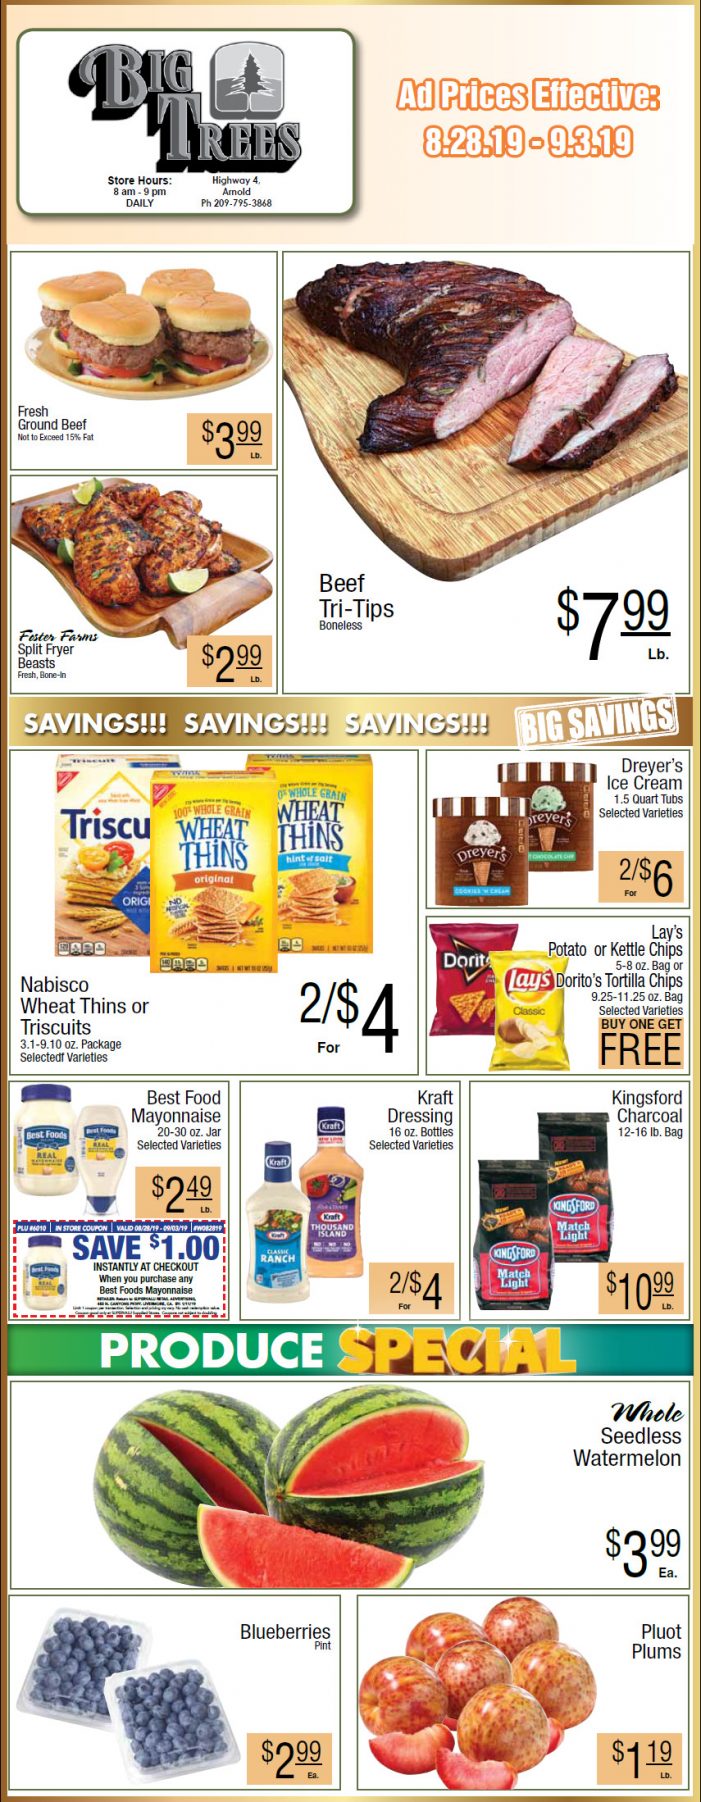 Big Trees Market Weekly Ad & Grocery Specials Through September 3rd!